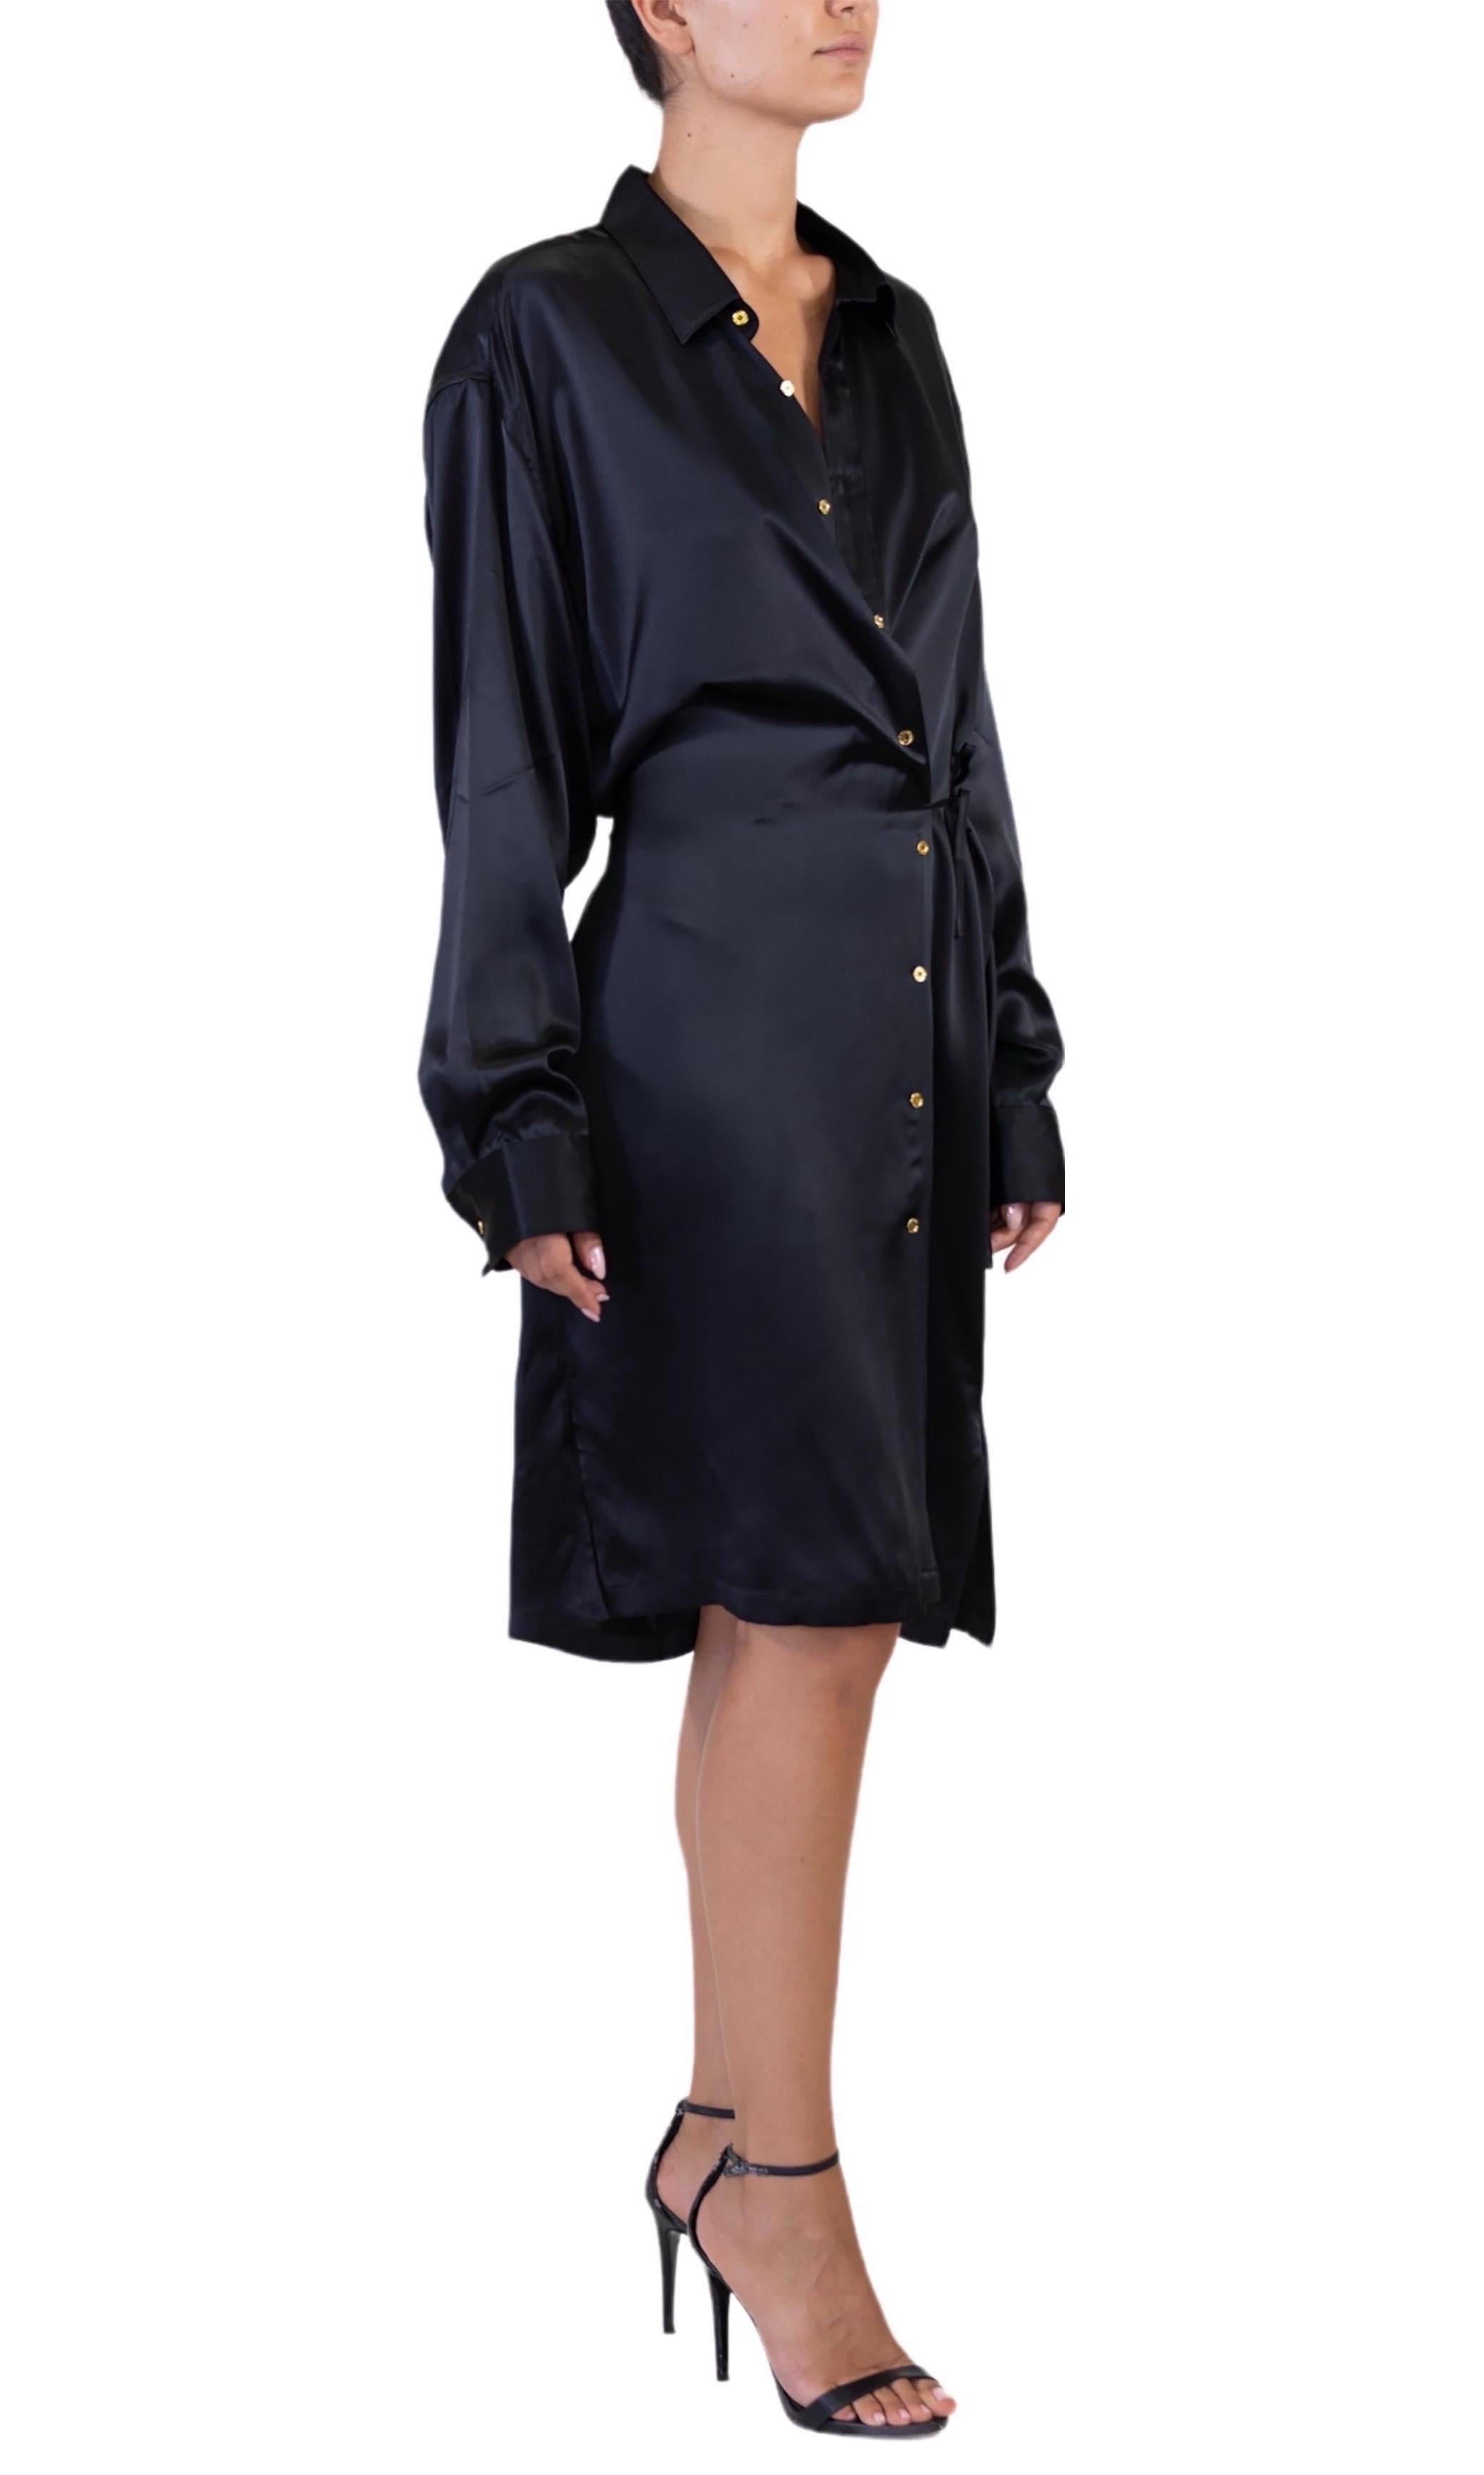 MORPHEW COLLECTION Black Silk Charmeuse Oversized Button Down Shirt Dress For Sale 3